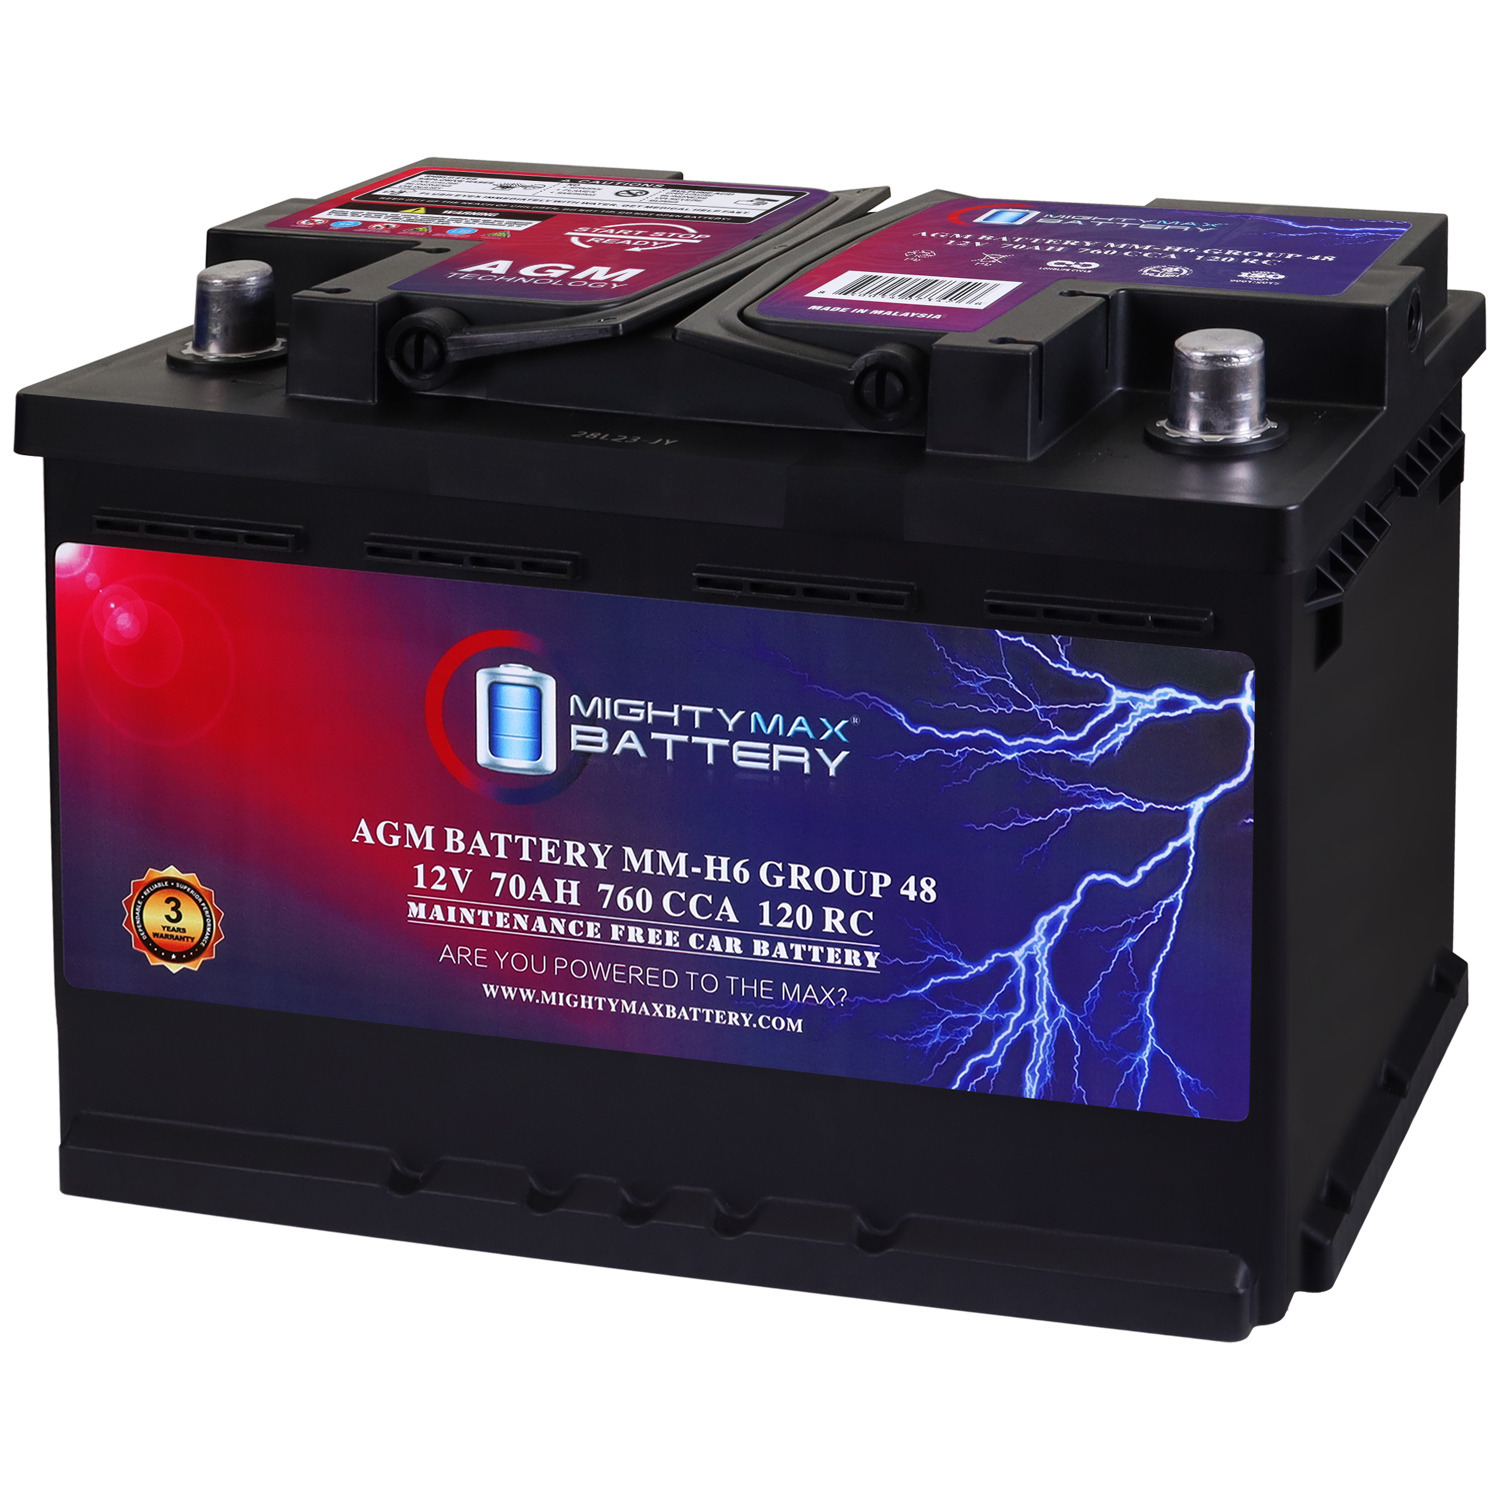 MM-H6 Group 48 12V 70AH 120RC 760CCA Replacement Battery Compatible with BMW 325is 87